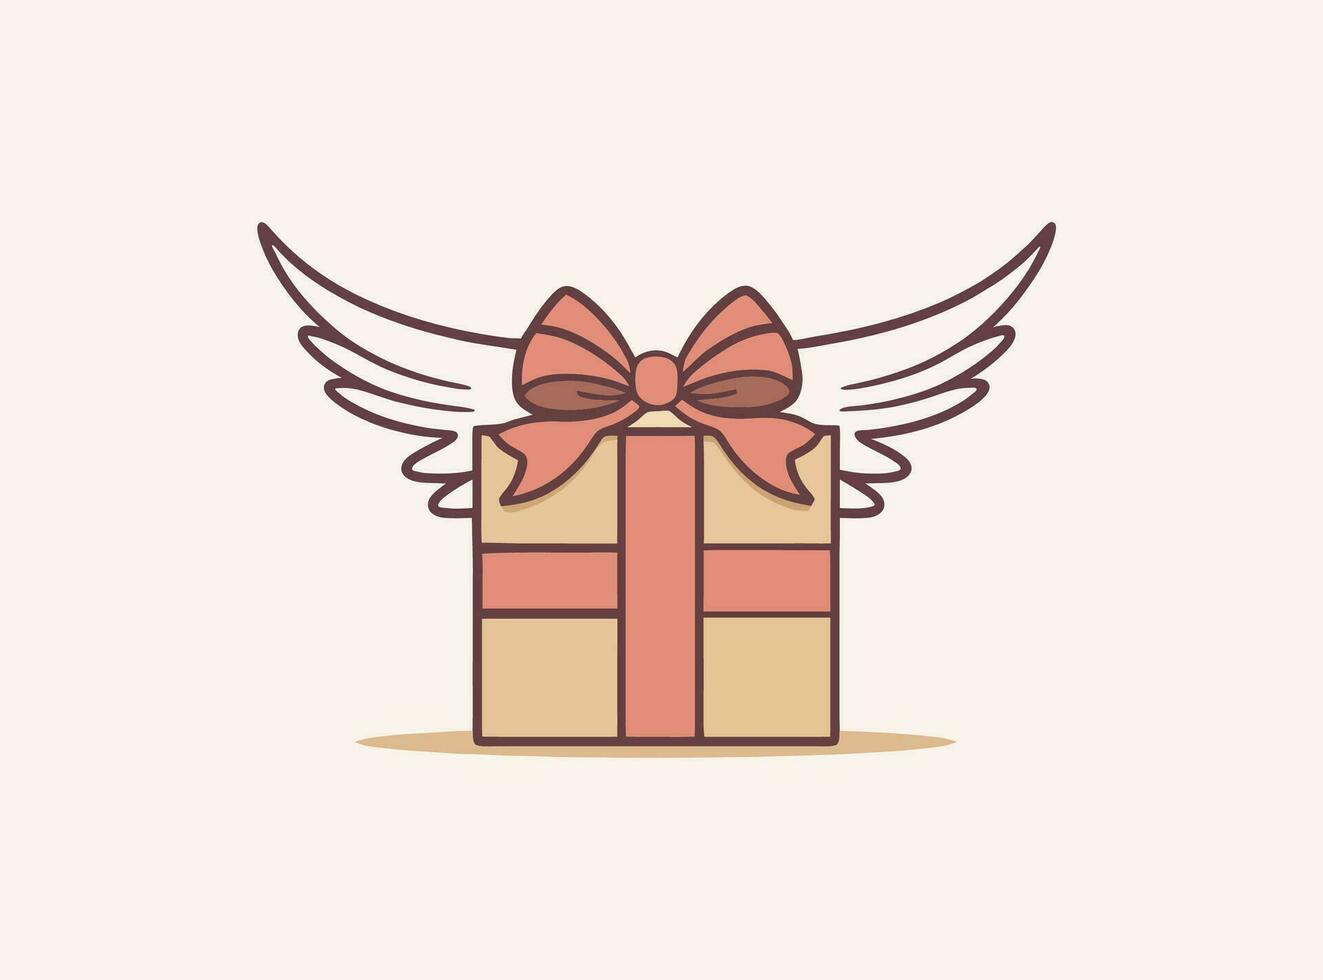 A charming gift card illustration in vector format, the ideal way to express your sentiments with style.